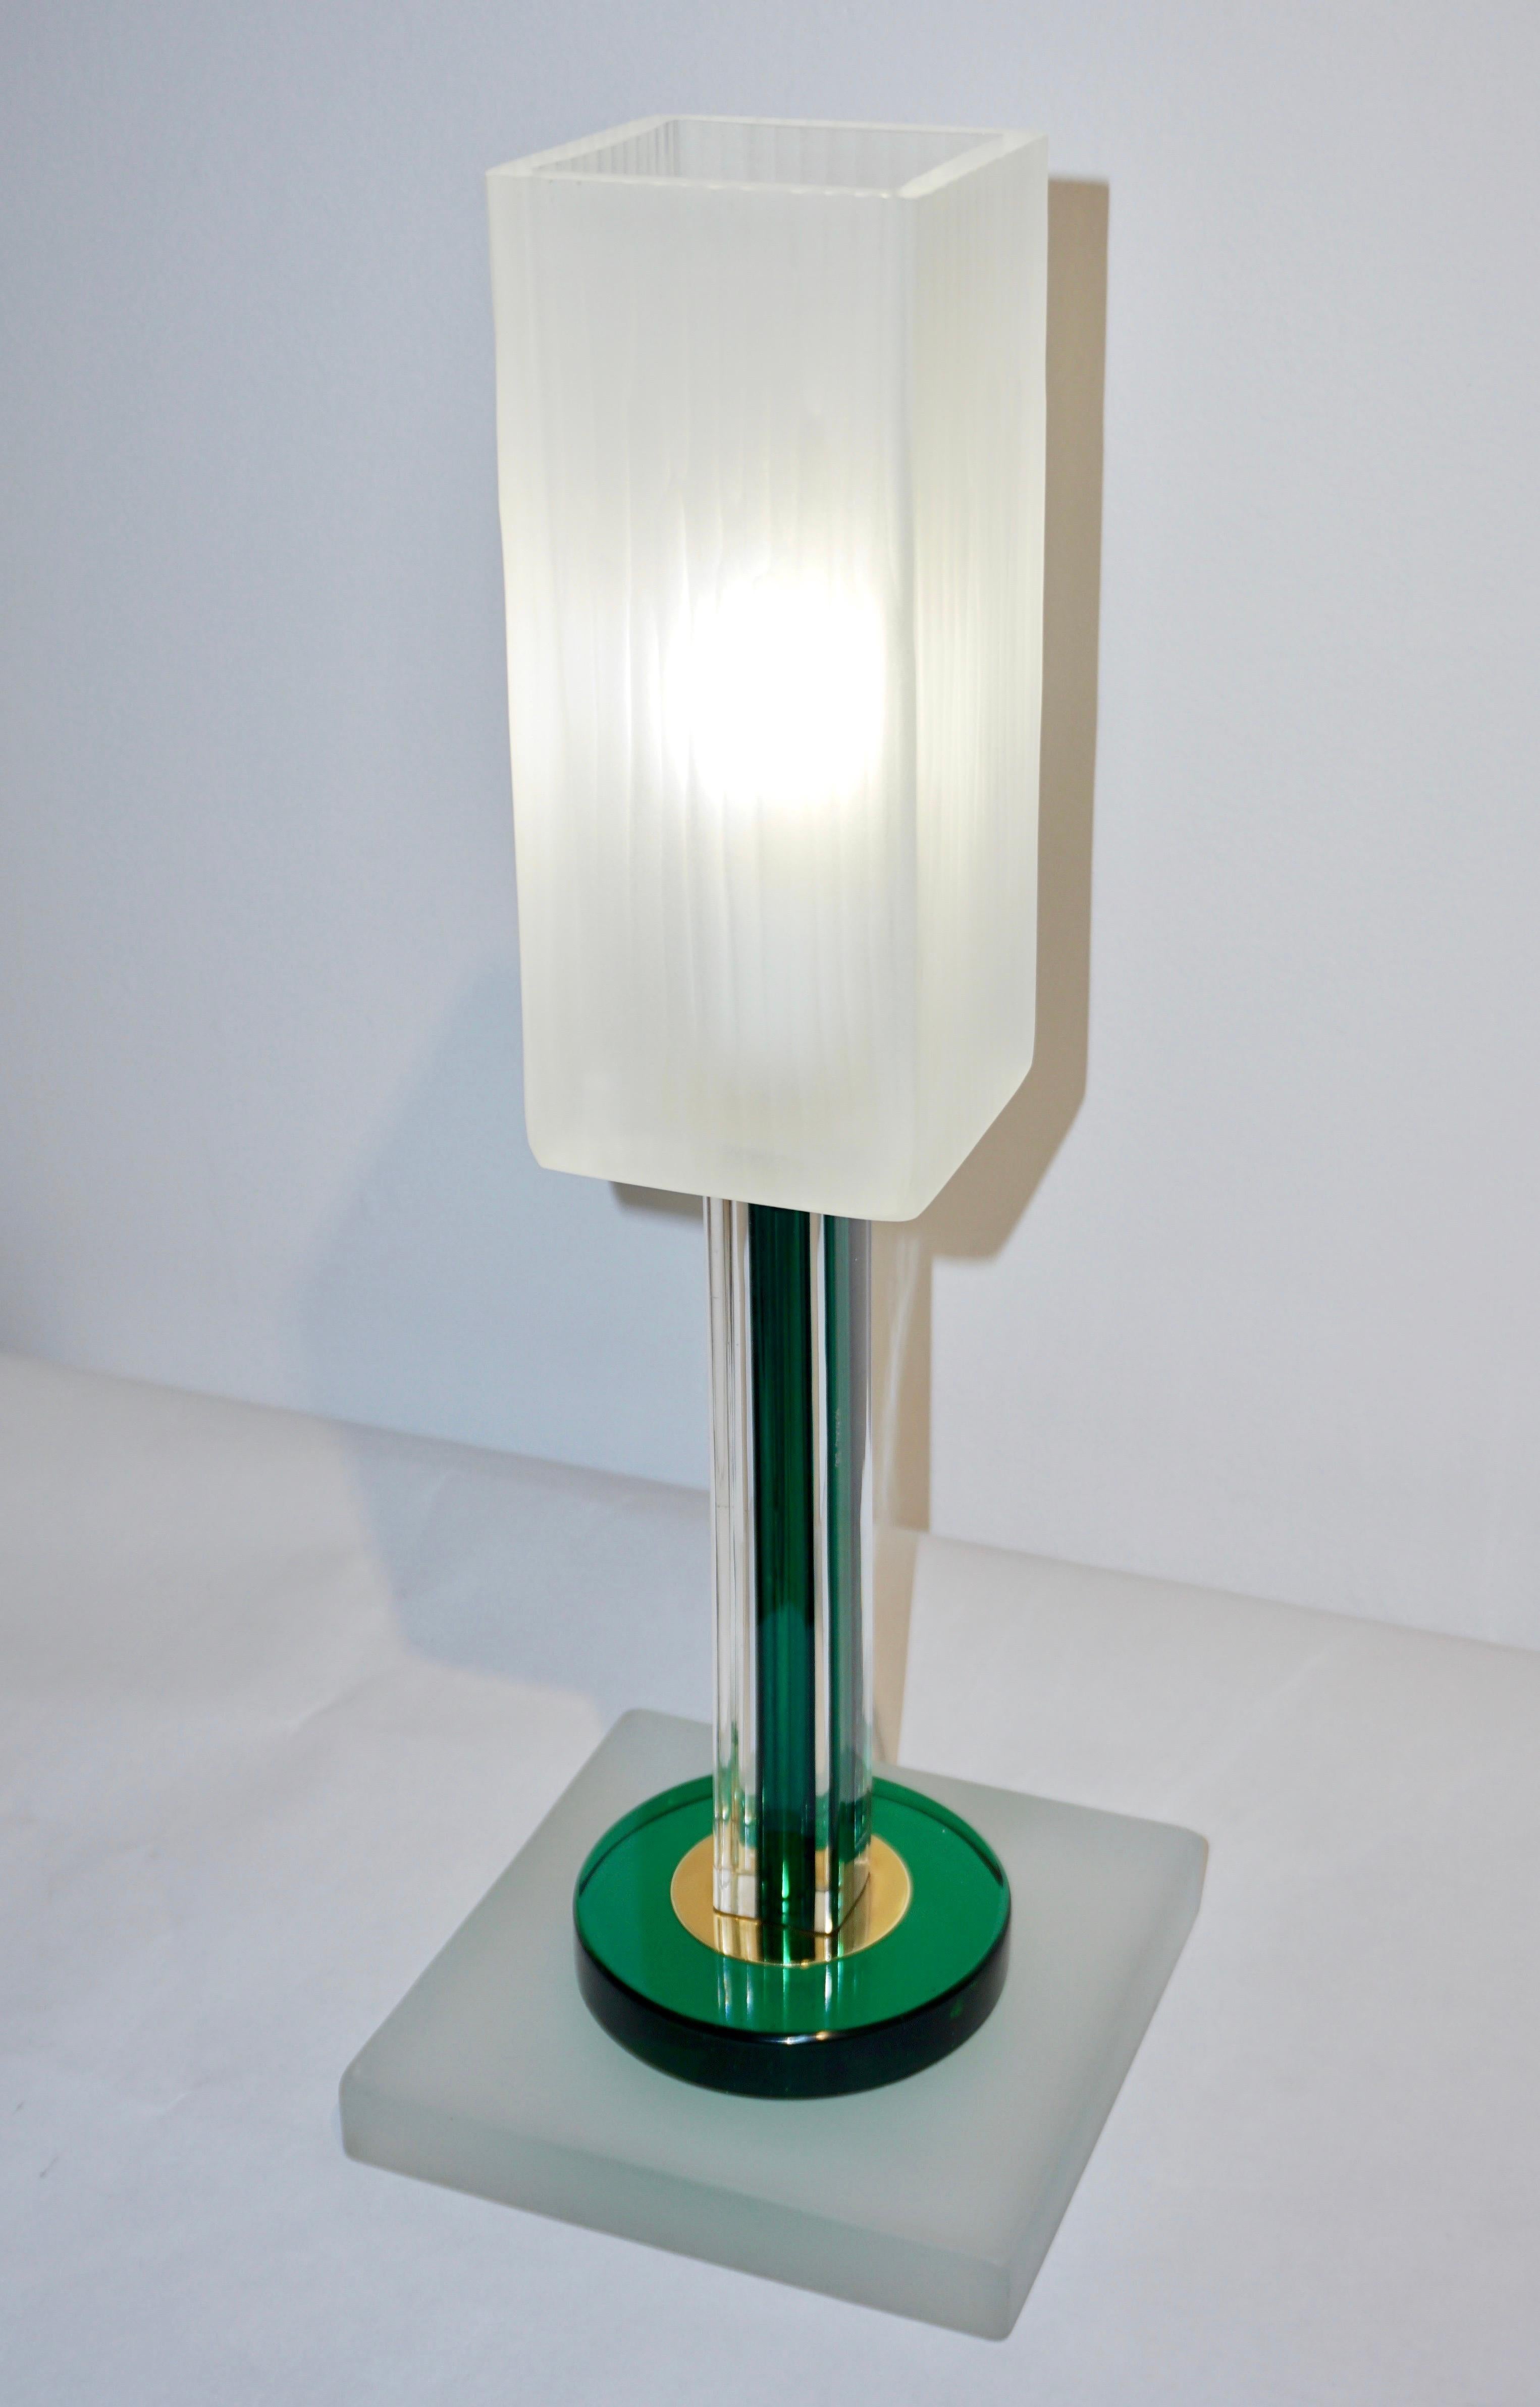 Do you want elegance and emerald green highlights in your room accents? Not just a pair of lamps, this is sculptural and ornamental lighting. A rare Italian Minimalist pair of lamps signed Venini 1992 of modern geometric design. Venini pieces always